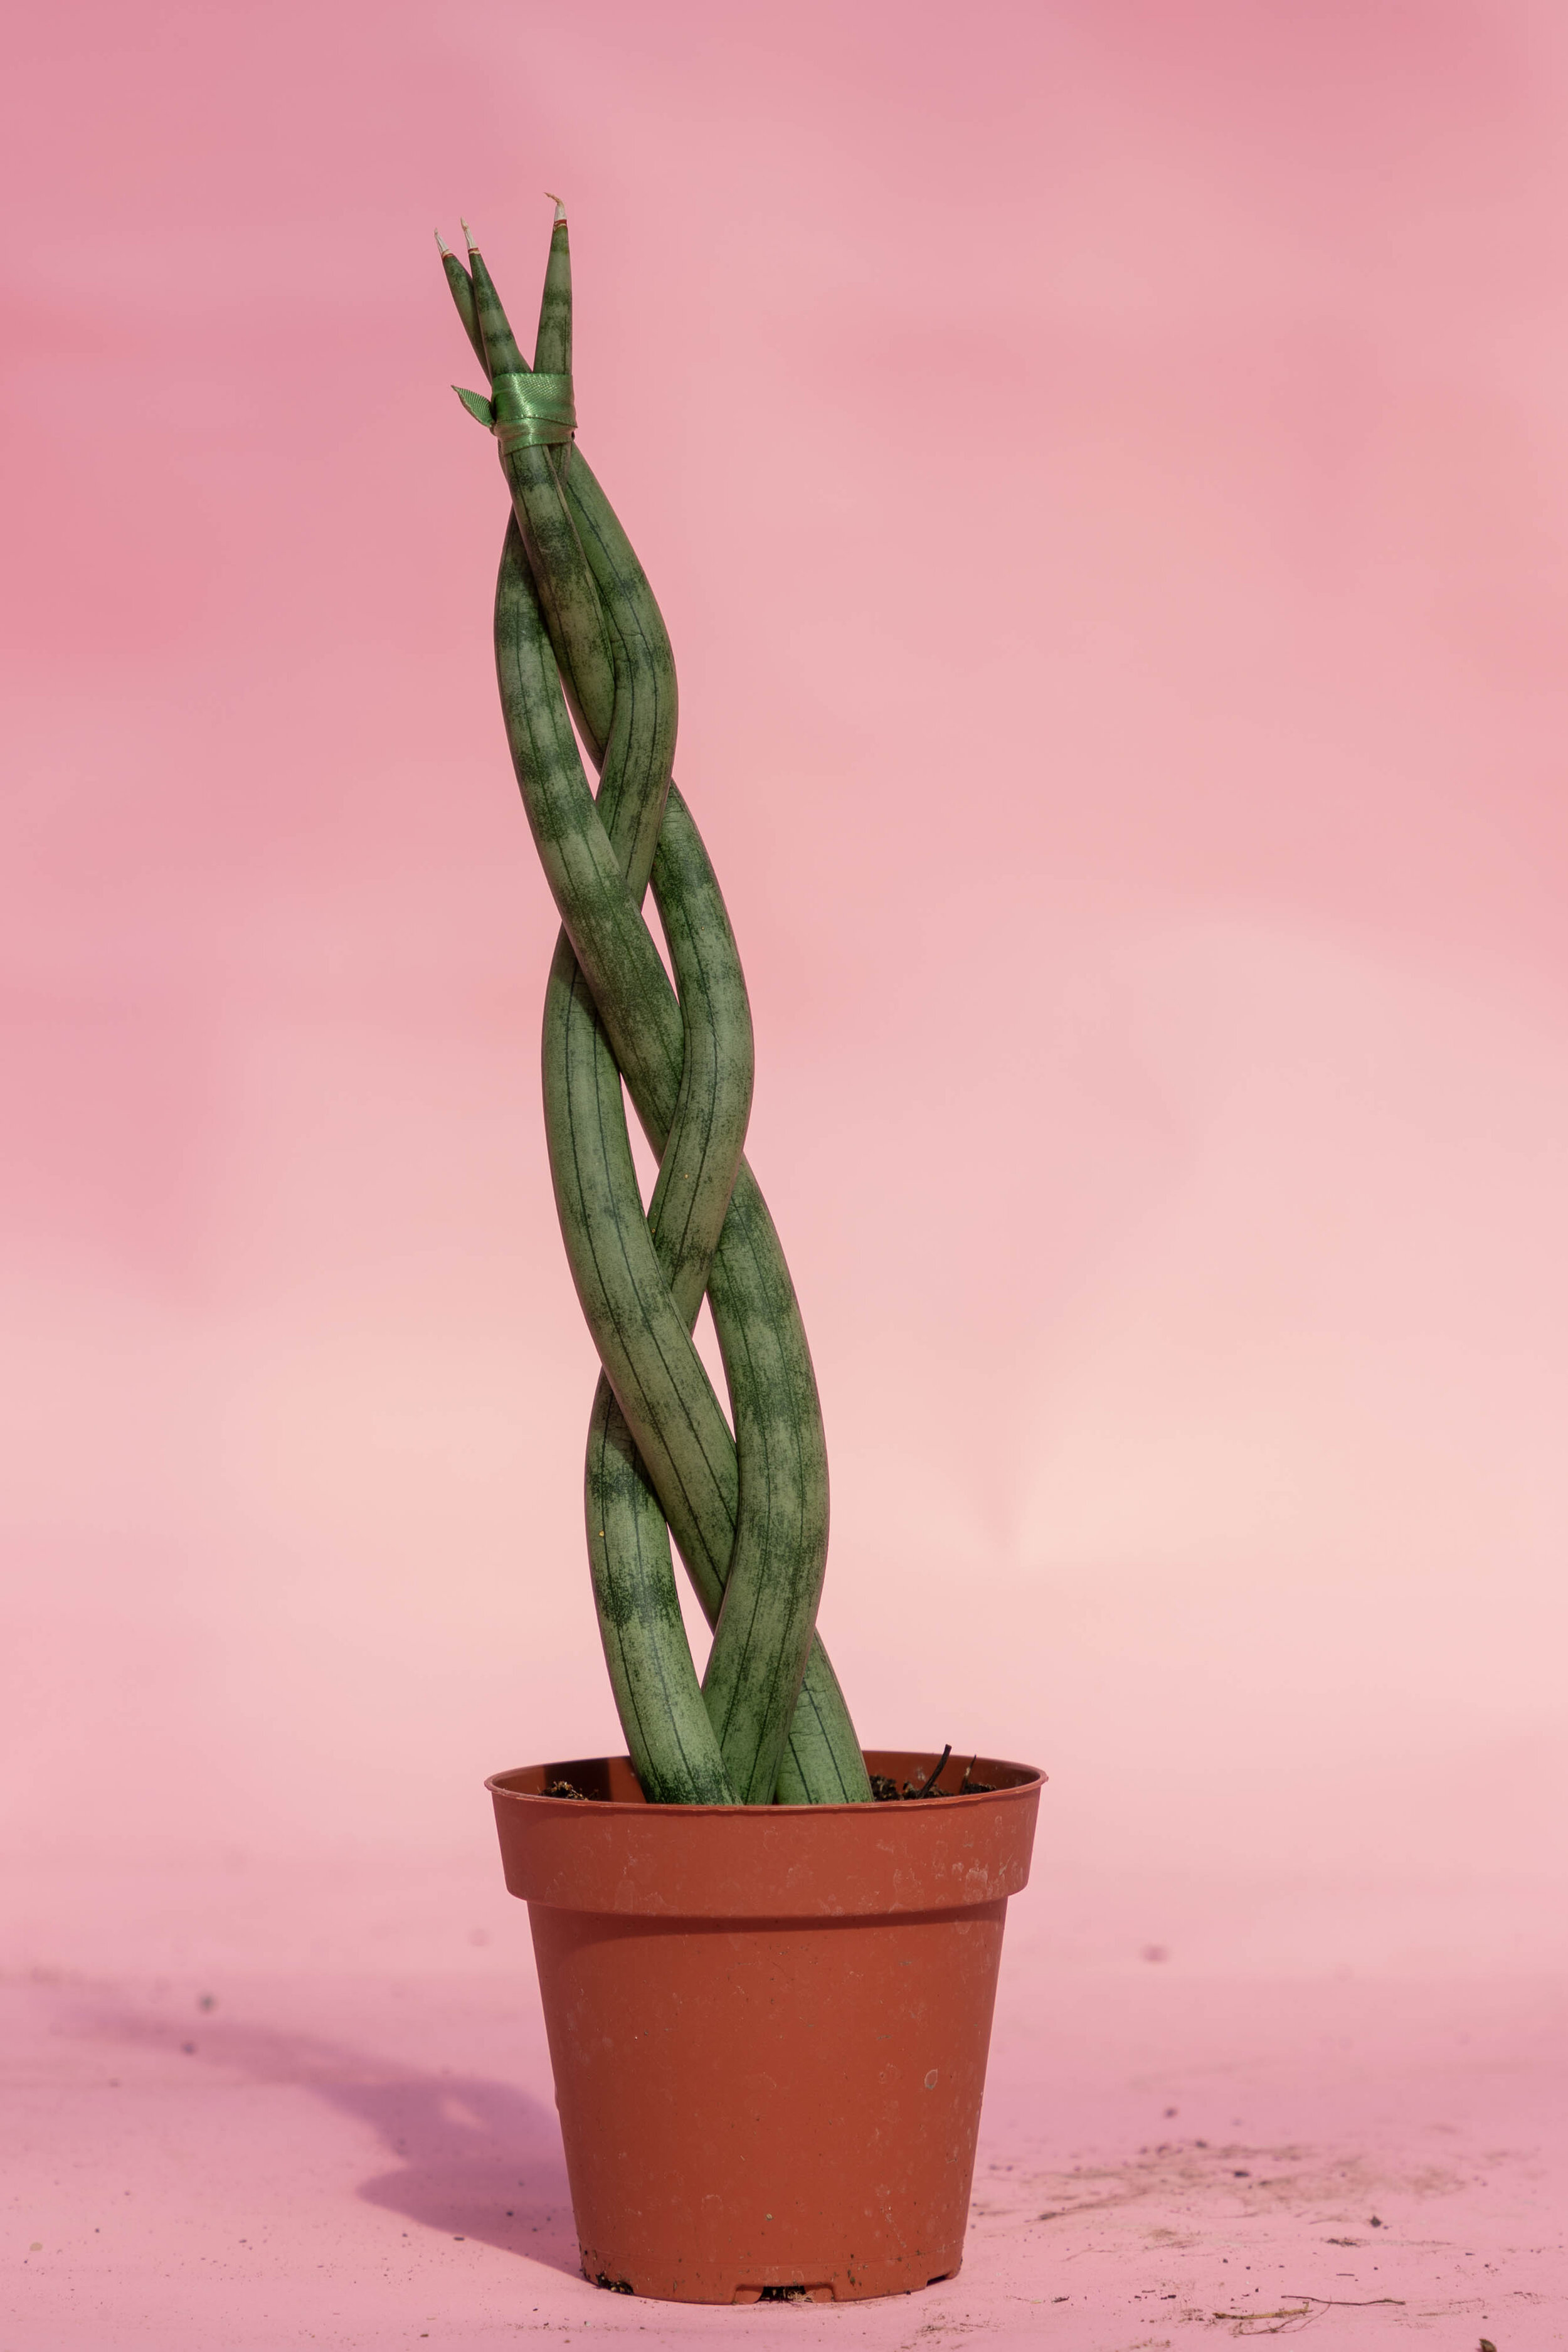 Sansevieria Cylindrica Braid Rooney Bloom,How To Grow Sweet Potatoes In A Bucket